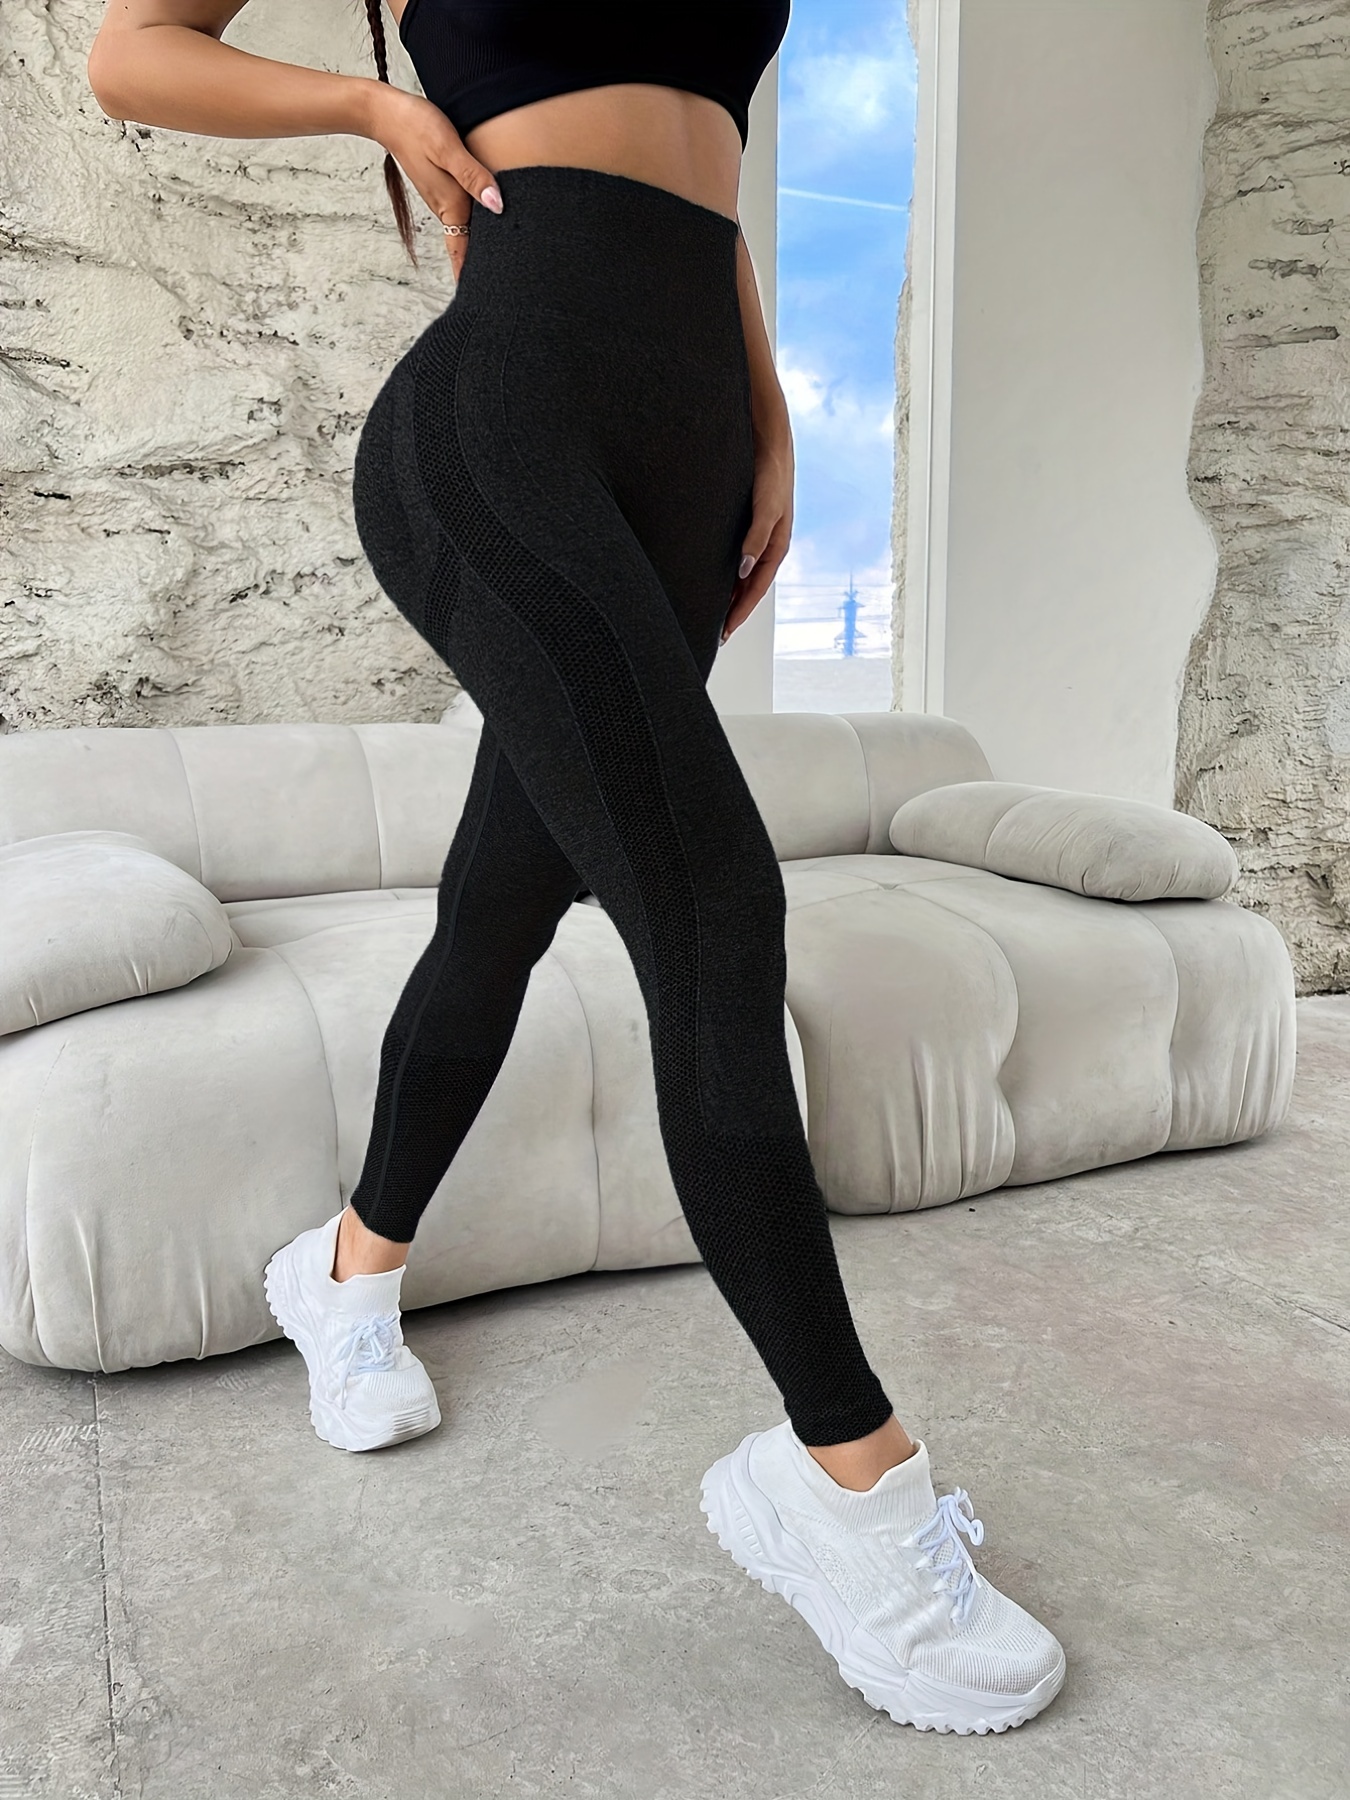 YWDJ Leggings for Women High Waist Plus Size European And American Seamless  Water Wash Knit Hygroscopic Sexy Hip Lifting Hip Sweating Yoga Pants Sports  Fitness Pants TightsBlackM 